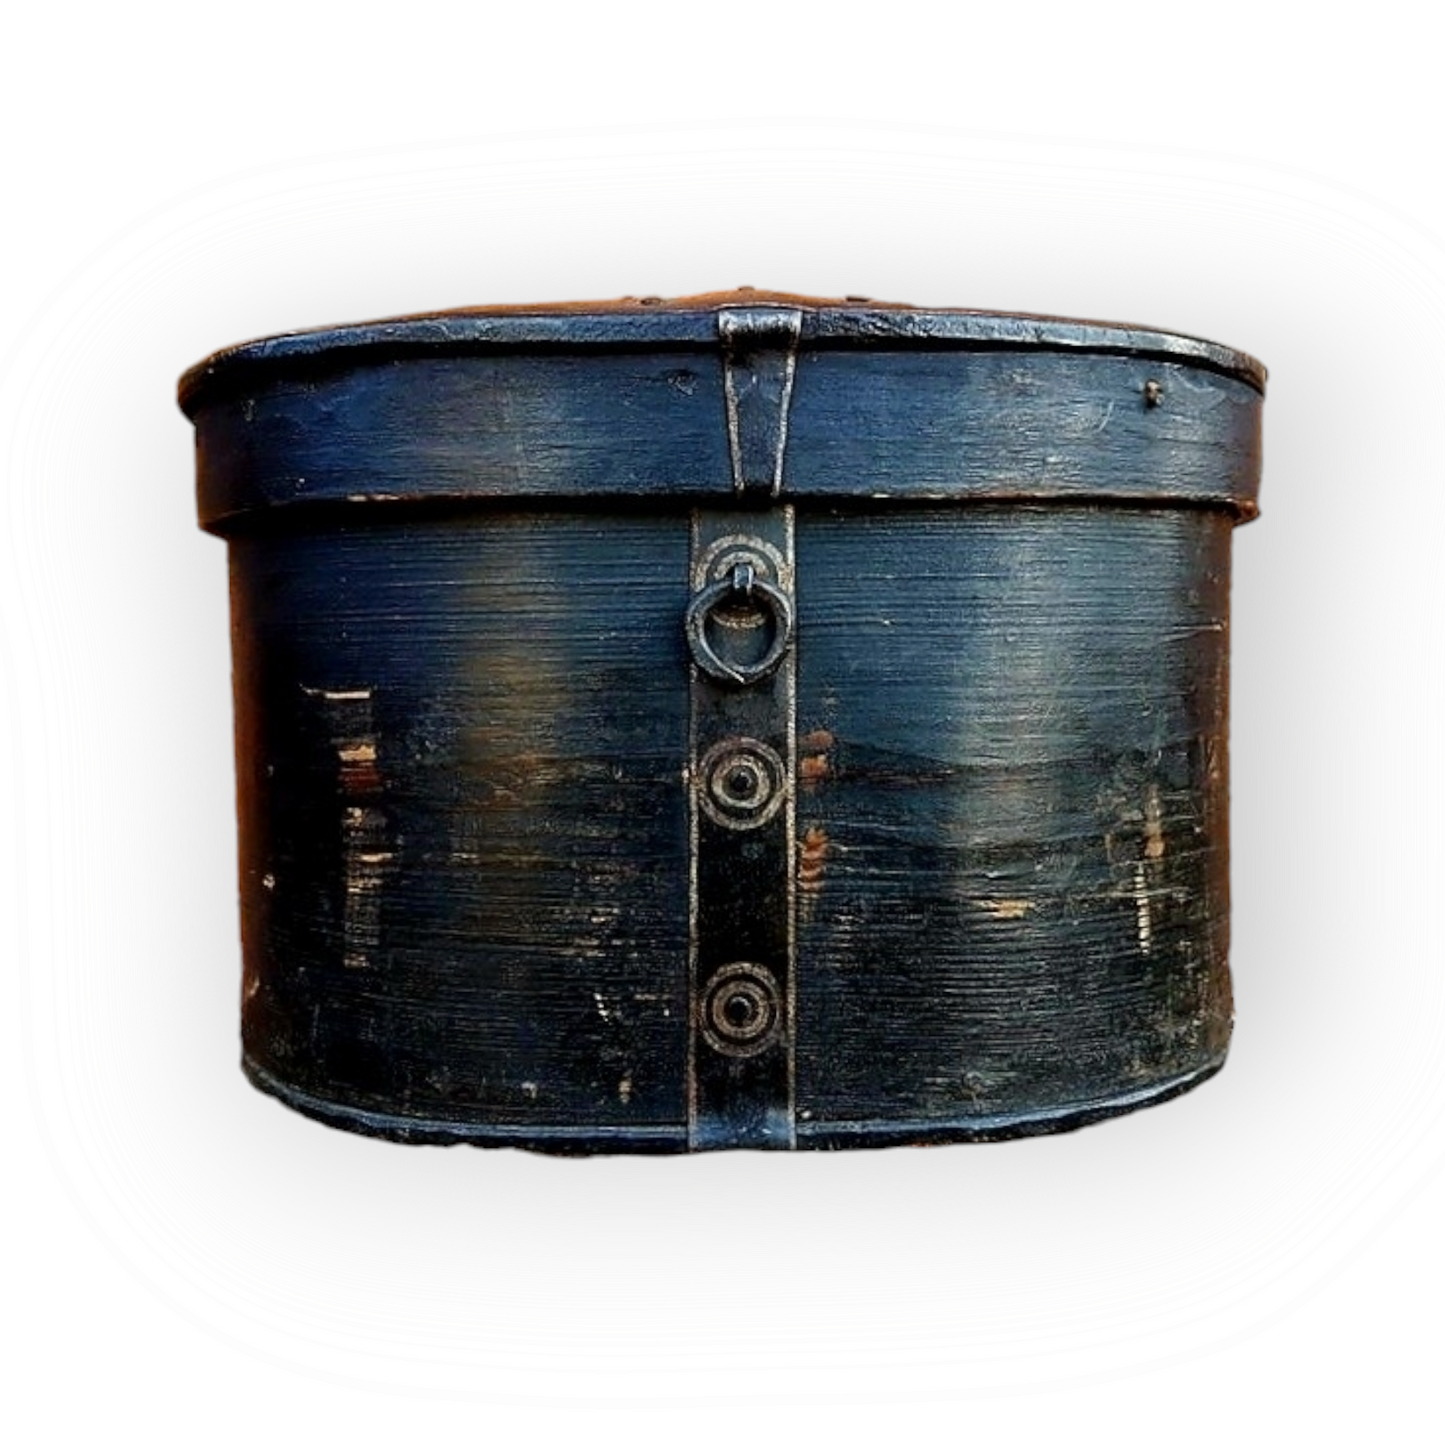 Large 18th Century Scandinavian Bentwood Box with Traces of Original Paint, Circa 1780